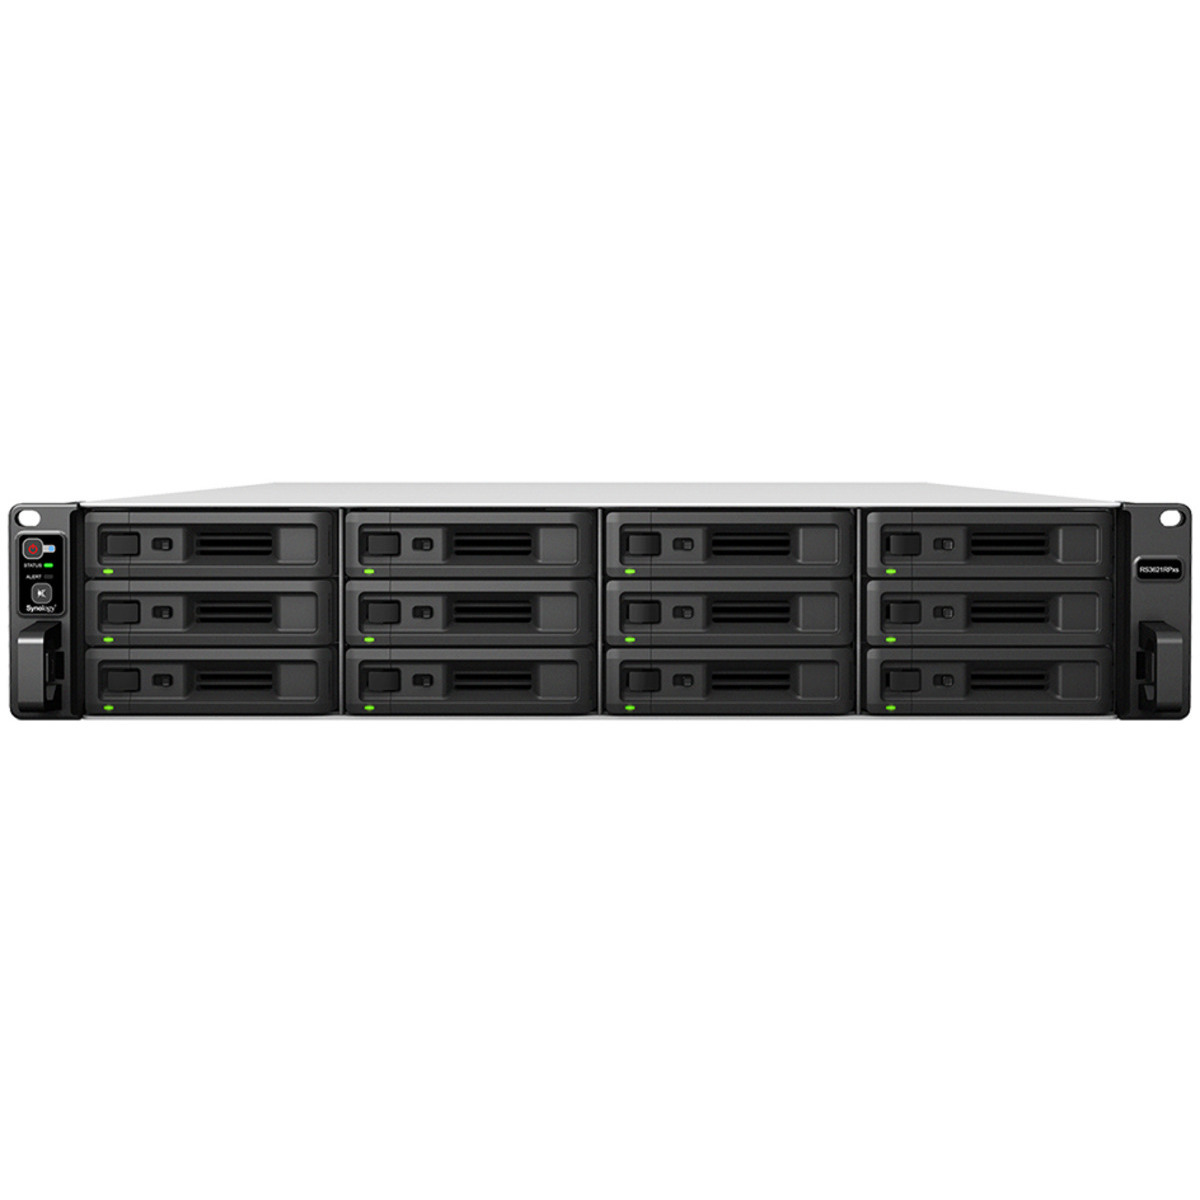 Synology RackStation RS3621RPxs 96tb 12-Bay RackMount Large Business / Enterprise NAS - Network Attached Storage Device 8x12tb Seagate EXOS X18 ST12000NM000J 3.5 7200rpm SATA 6Gb/s HDD ENTERPRISE Class Drives Installed - Burn-In Tested RackStation RS3621RPxs